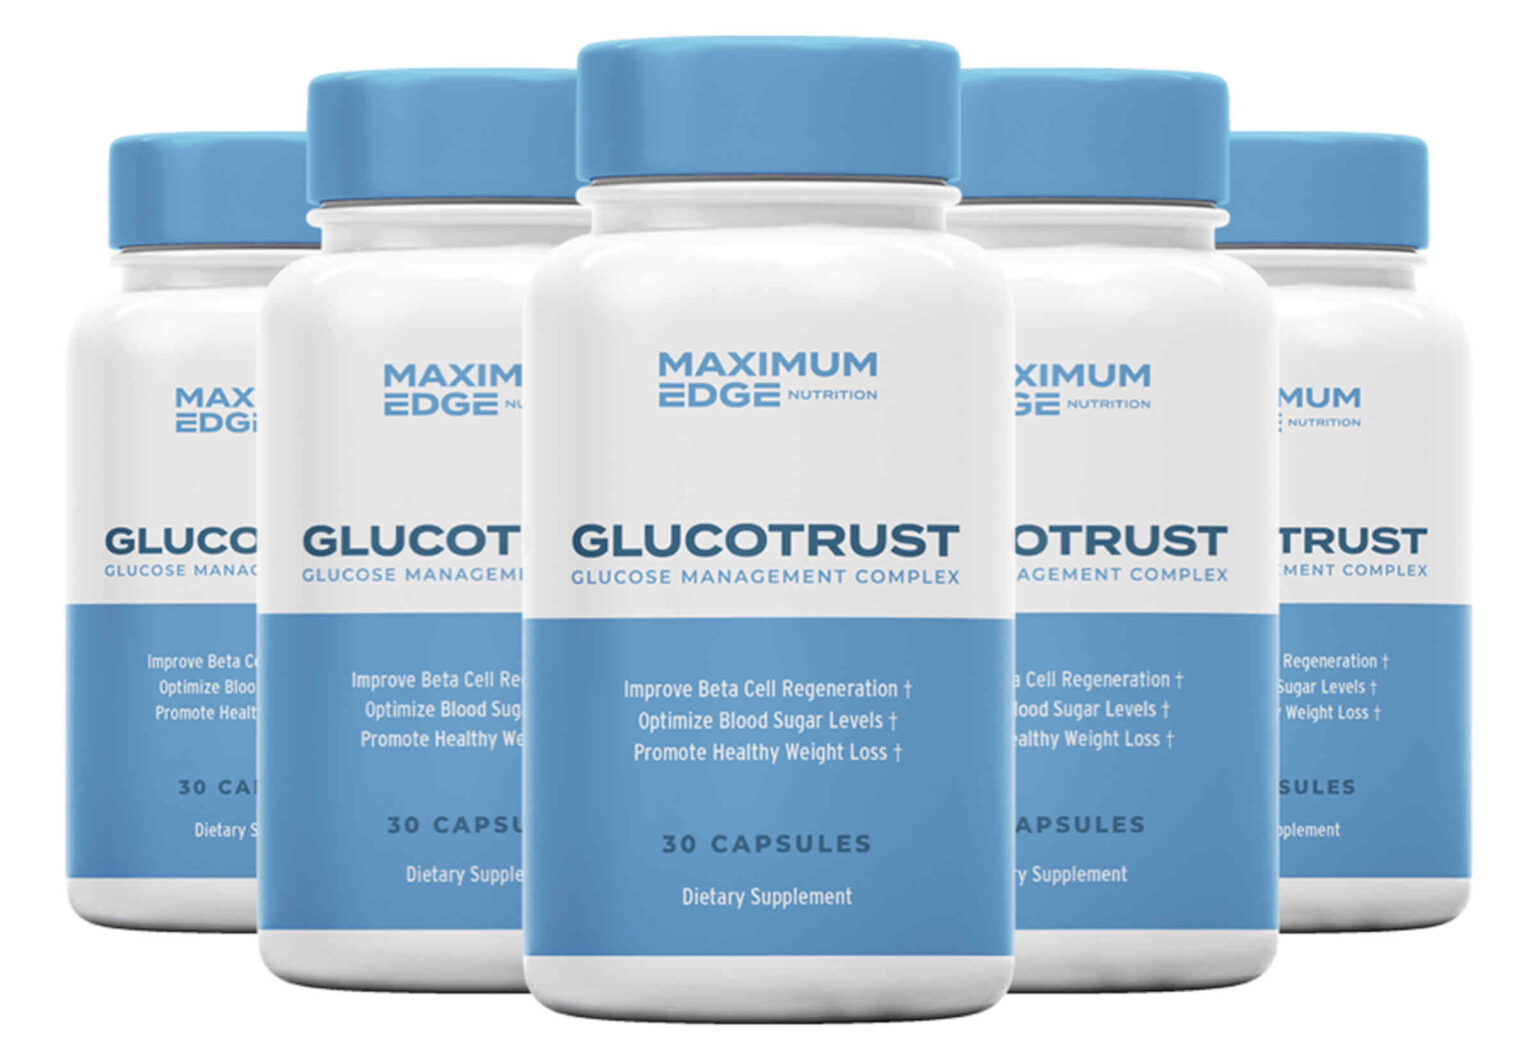 Live in the UK and need help managing your glucose levels? Take notes so you can ask your doctor if GlucoTrust is right for the job!